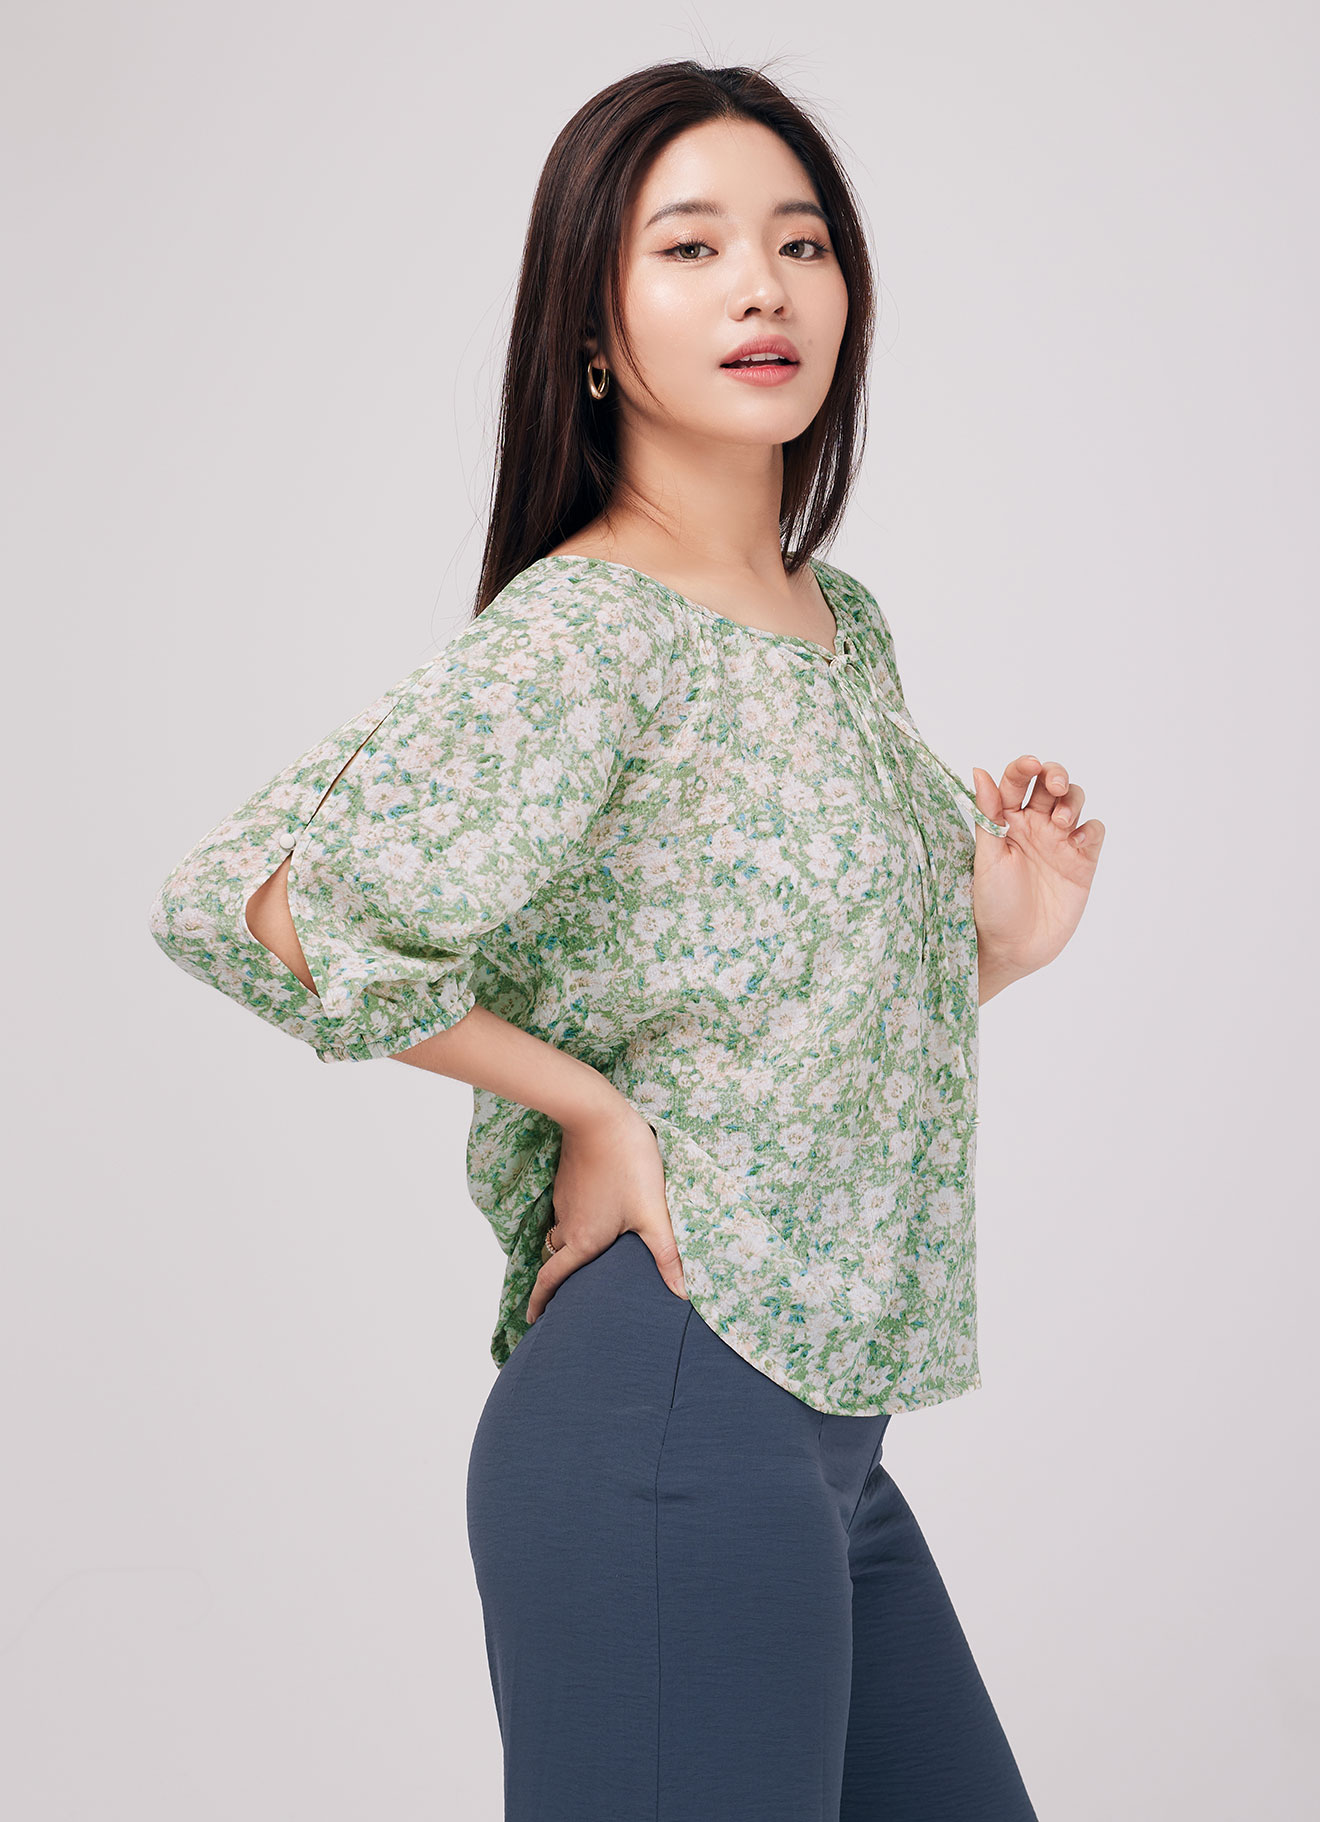 Fluorite-Green by Floral Printed Blouse